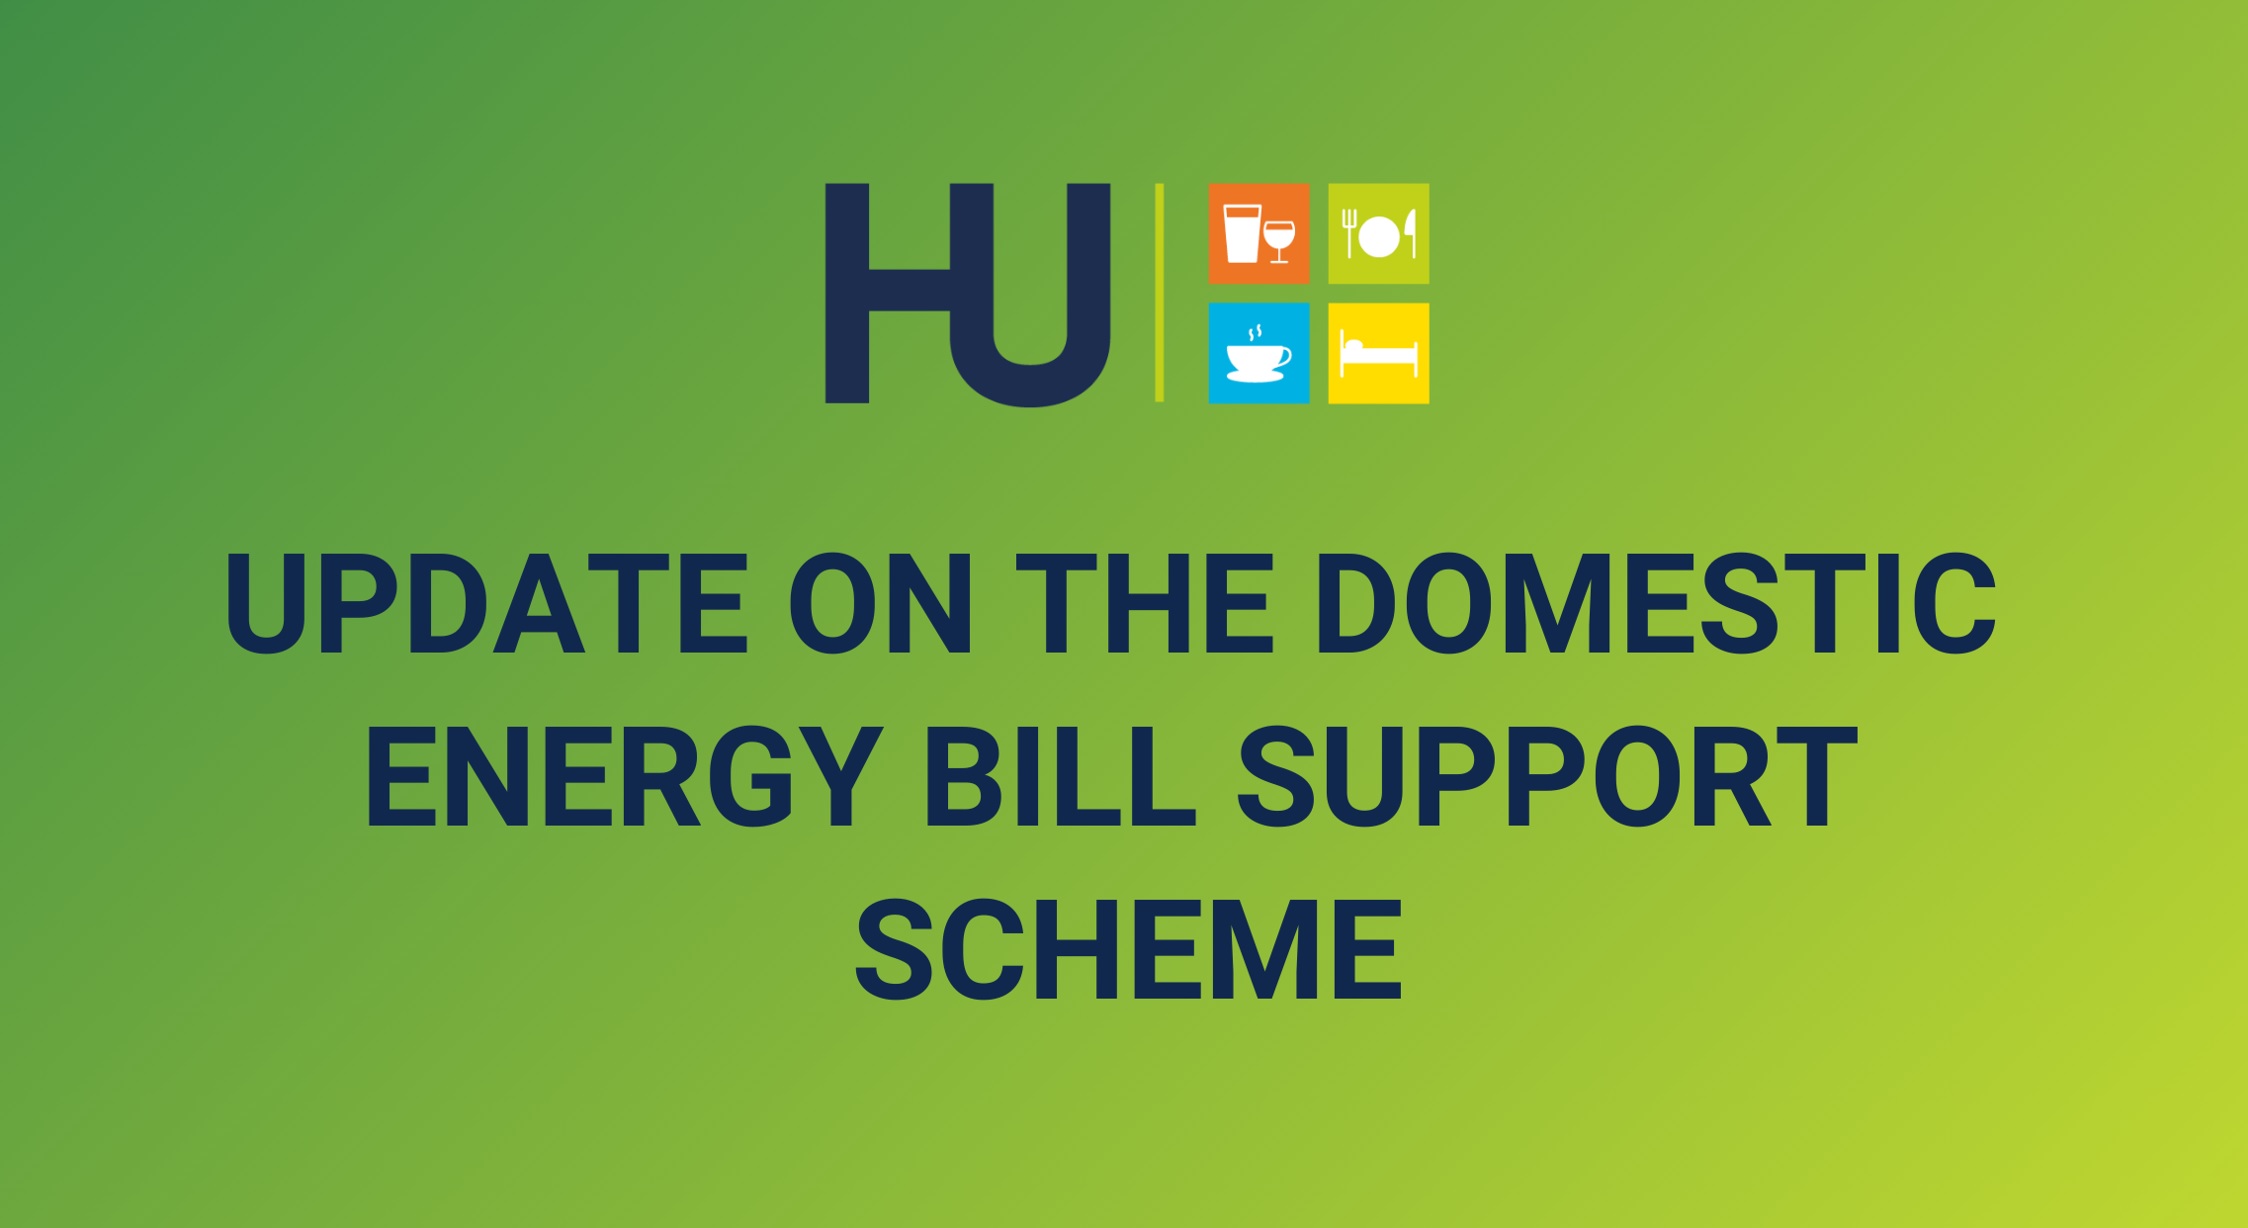 UPDATE ON DOMESTIC ENERGY BILL SUPPORT SCHEME AND CHRISTMAS LICENSING HOURS 2022